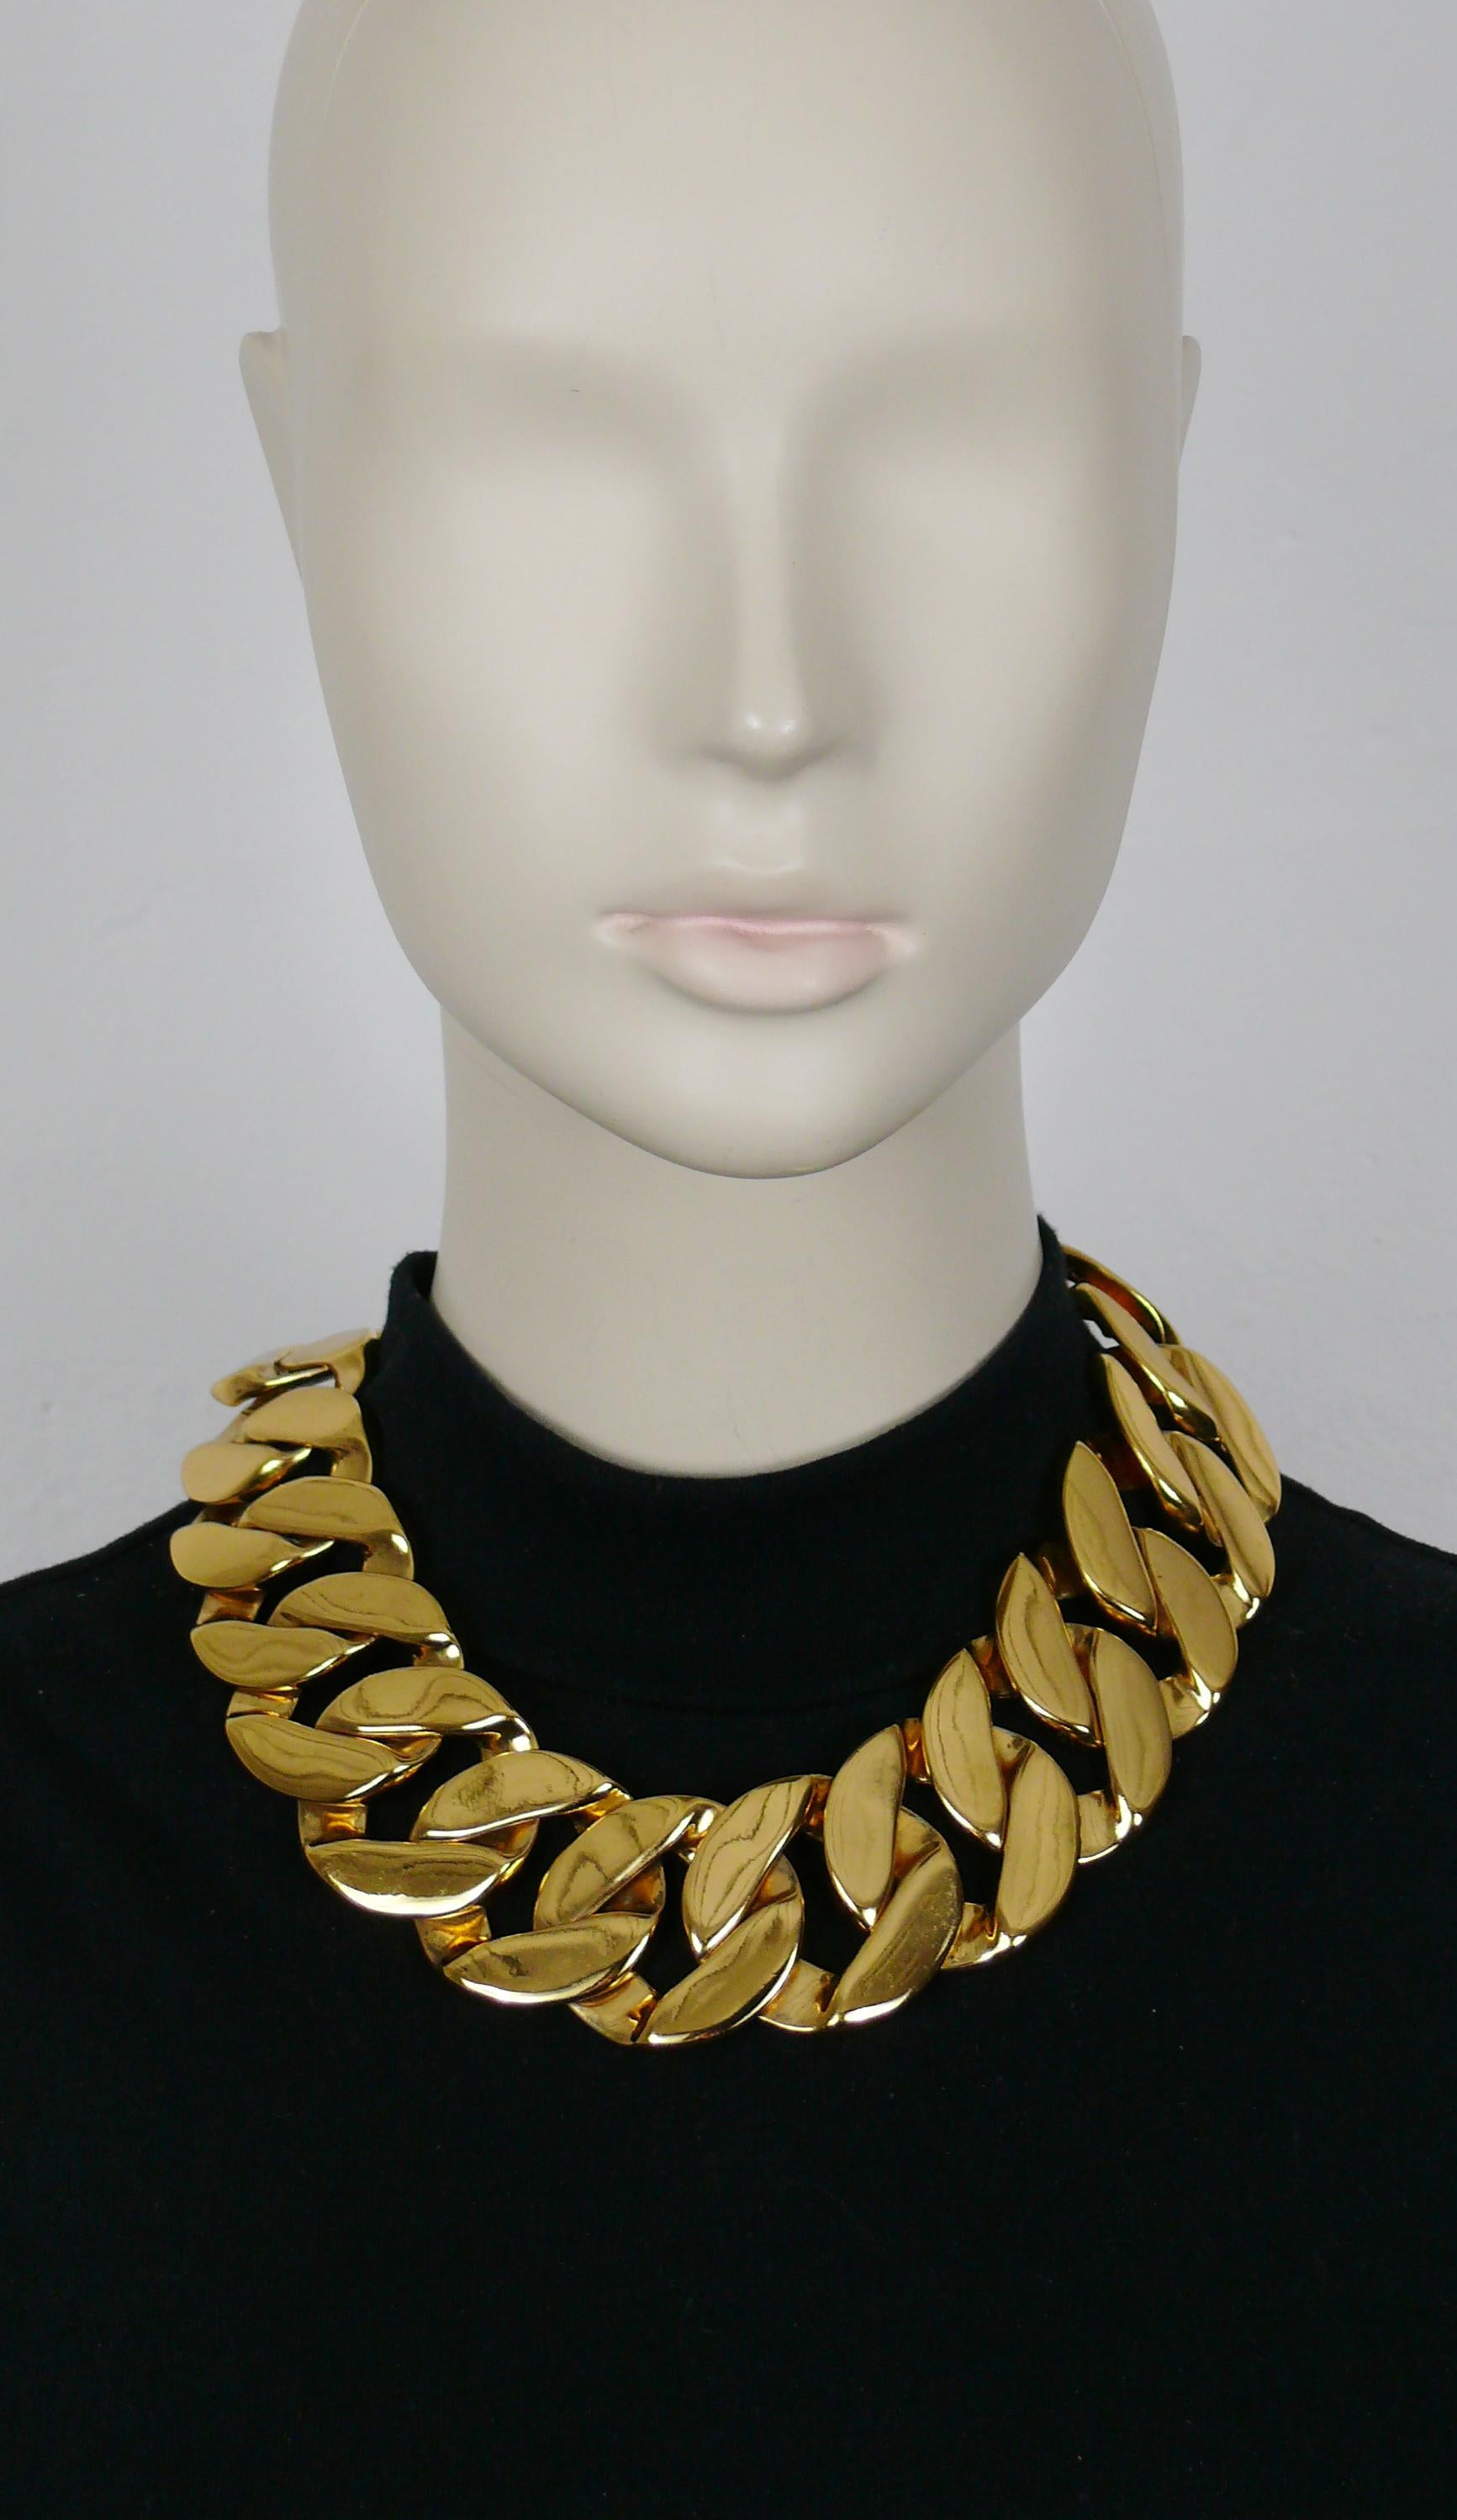 YVES SAINT LAURENT vintage chunky gold tone curb chain necklace.

Adjustable T-bar and heart toggles closure.

Embossed YSL Made in France.
Cursive YVES SAINT LAURENT signature on the heart rings.

Indicative measurements : adjustable length from